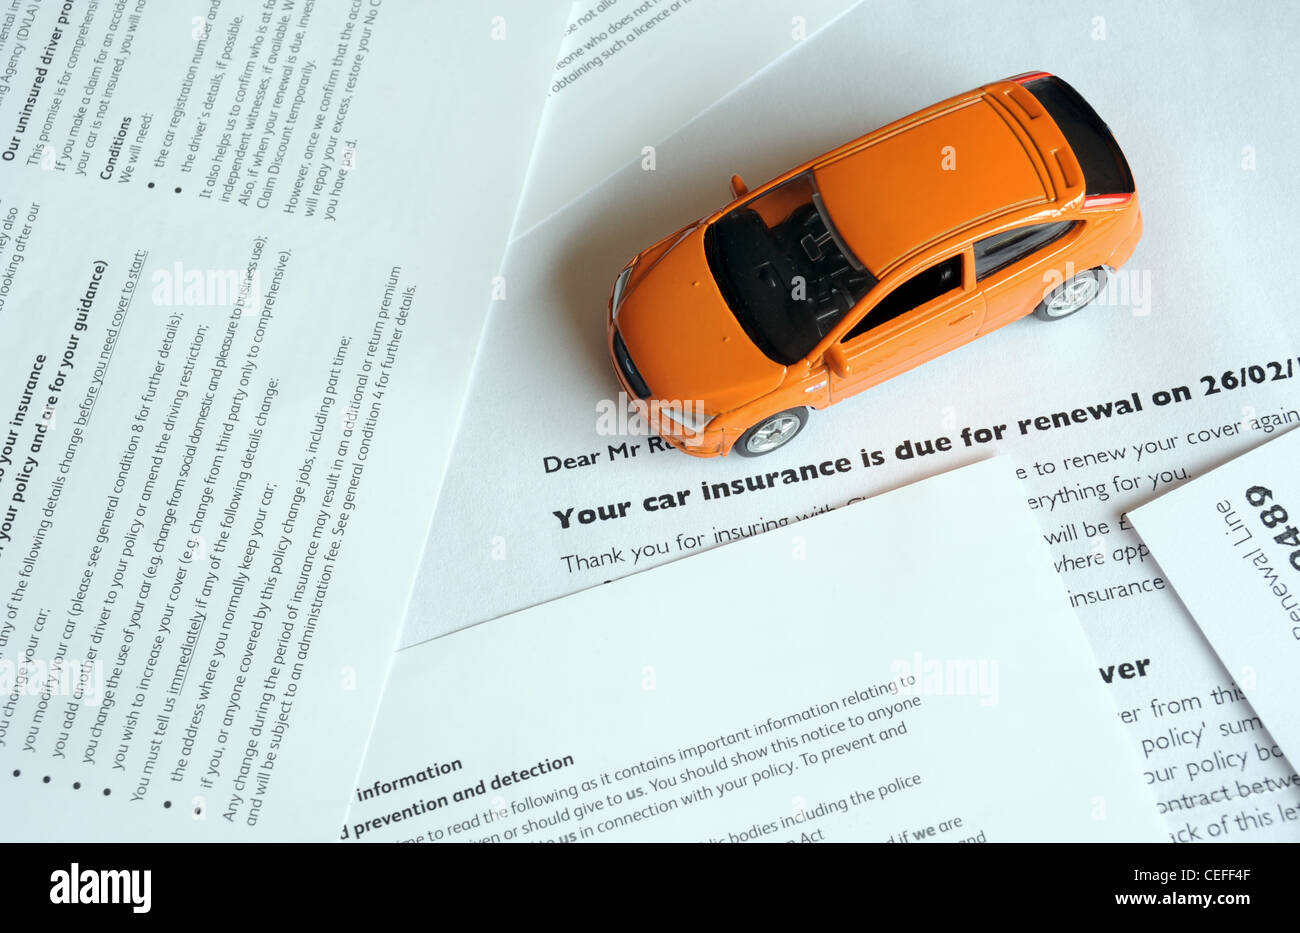 MODEL CAR WITH MOTOR INSURANCE RENEWAL LETTER RE MOTORING INSURANCE COSTS REPAIRS ACCIDENTS RUNNING HOUSEHOLD BILLS RISING UK Stock Photo